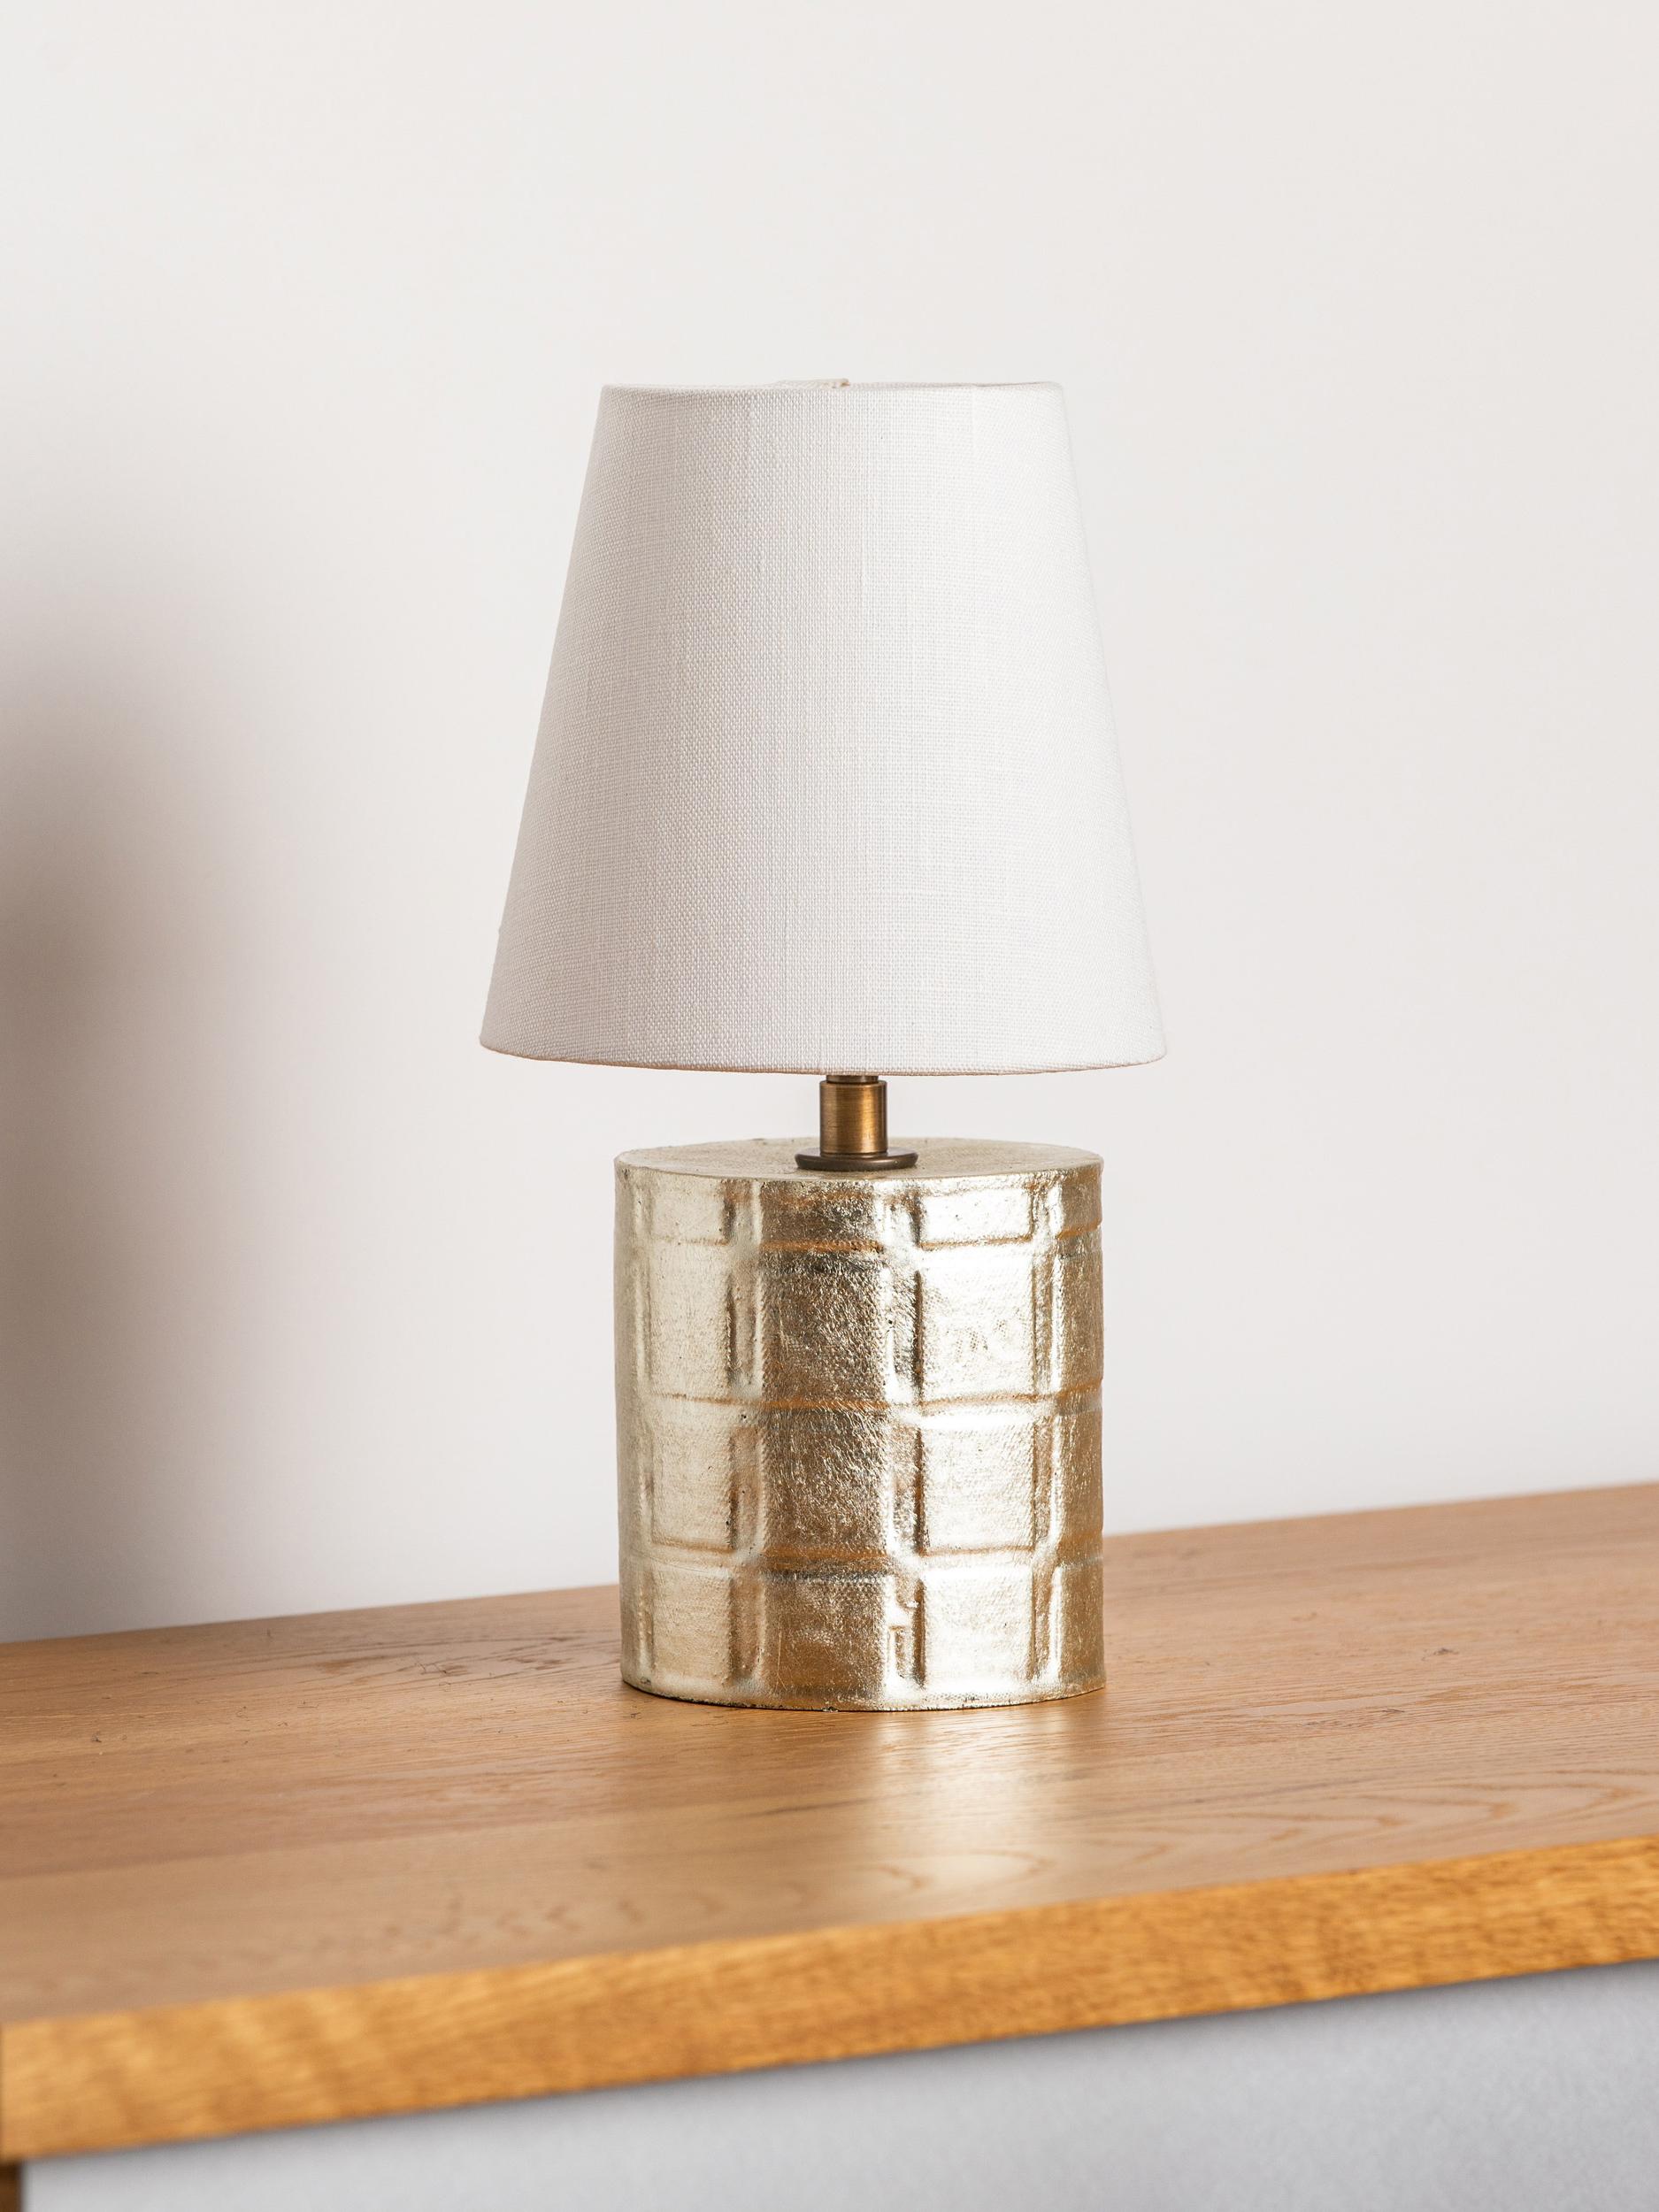 This limited edition Cornwall lamp is the product of our collaboration with artist and master-gilder Carol Leskanic. Once glazed, 12K-white-gold leaf is applied to the handcrafted stoneware using a traditional oil gilding method.

Finish

-